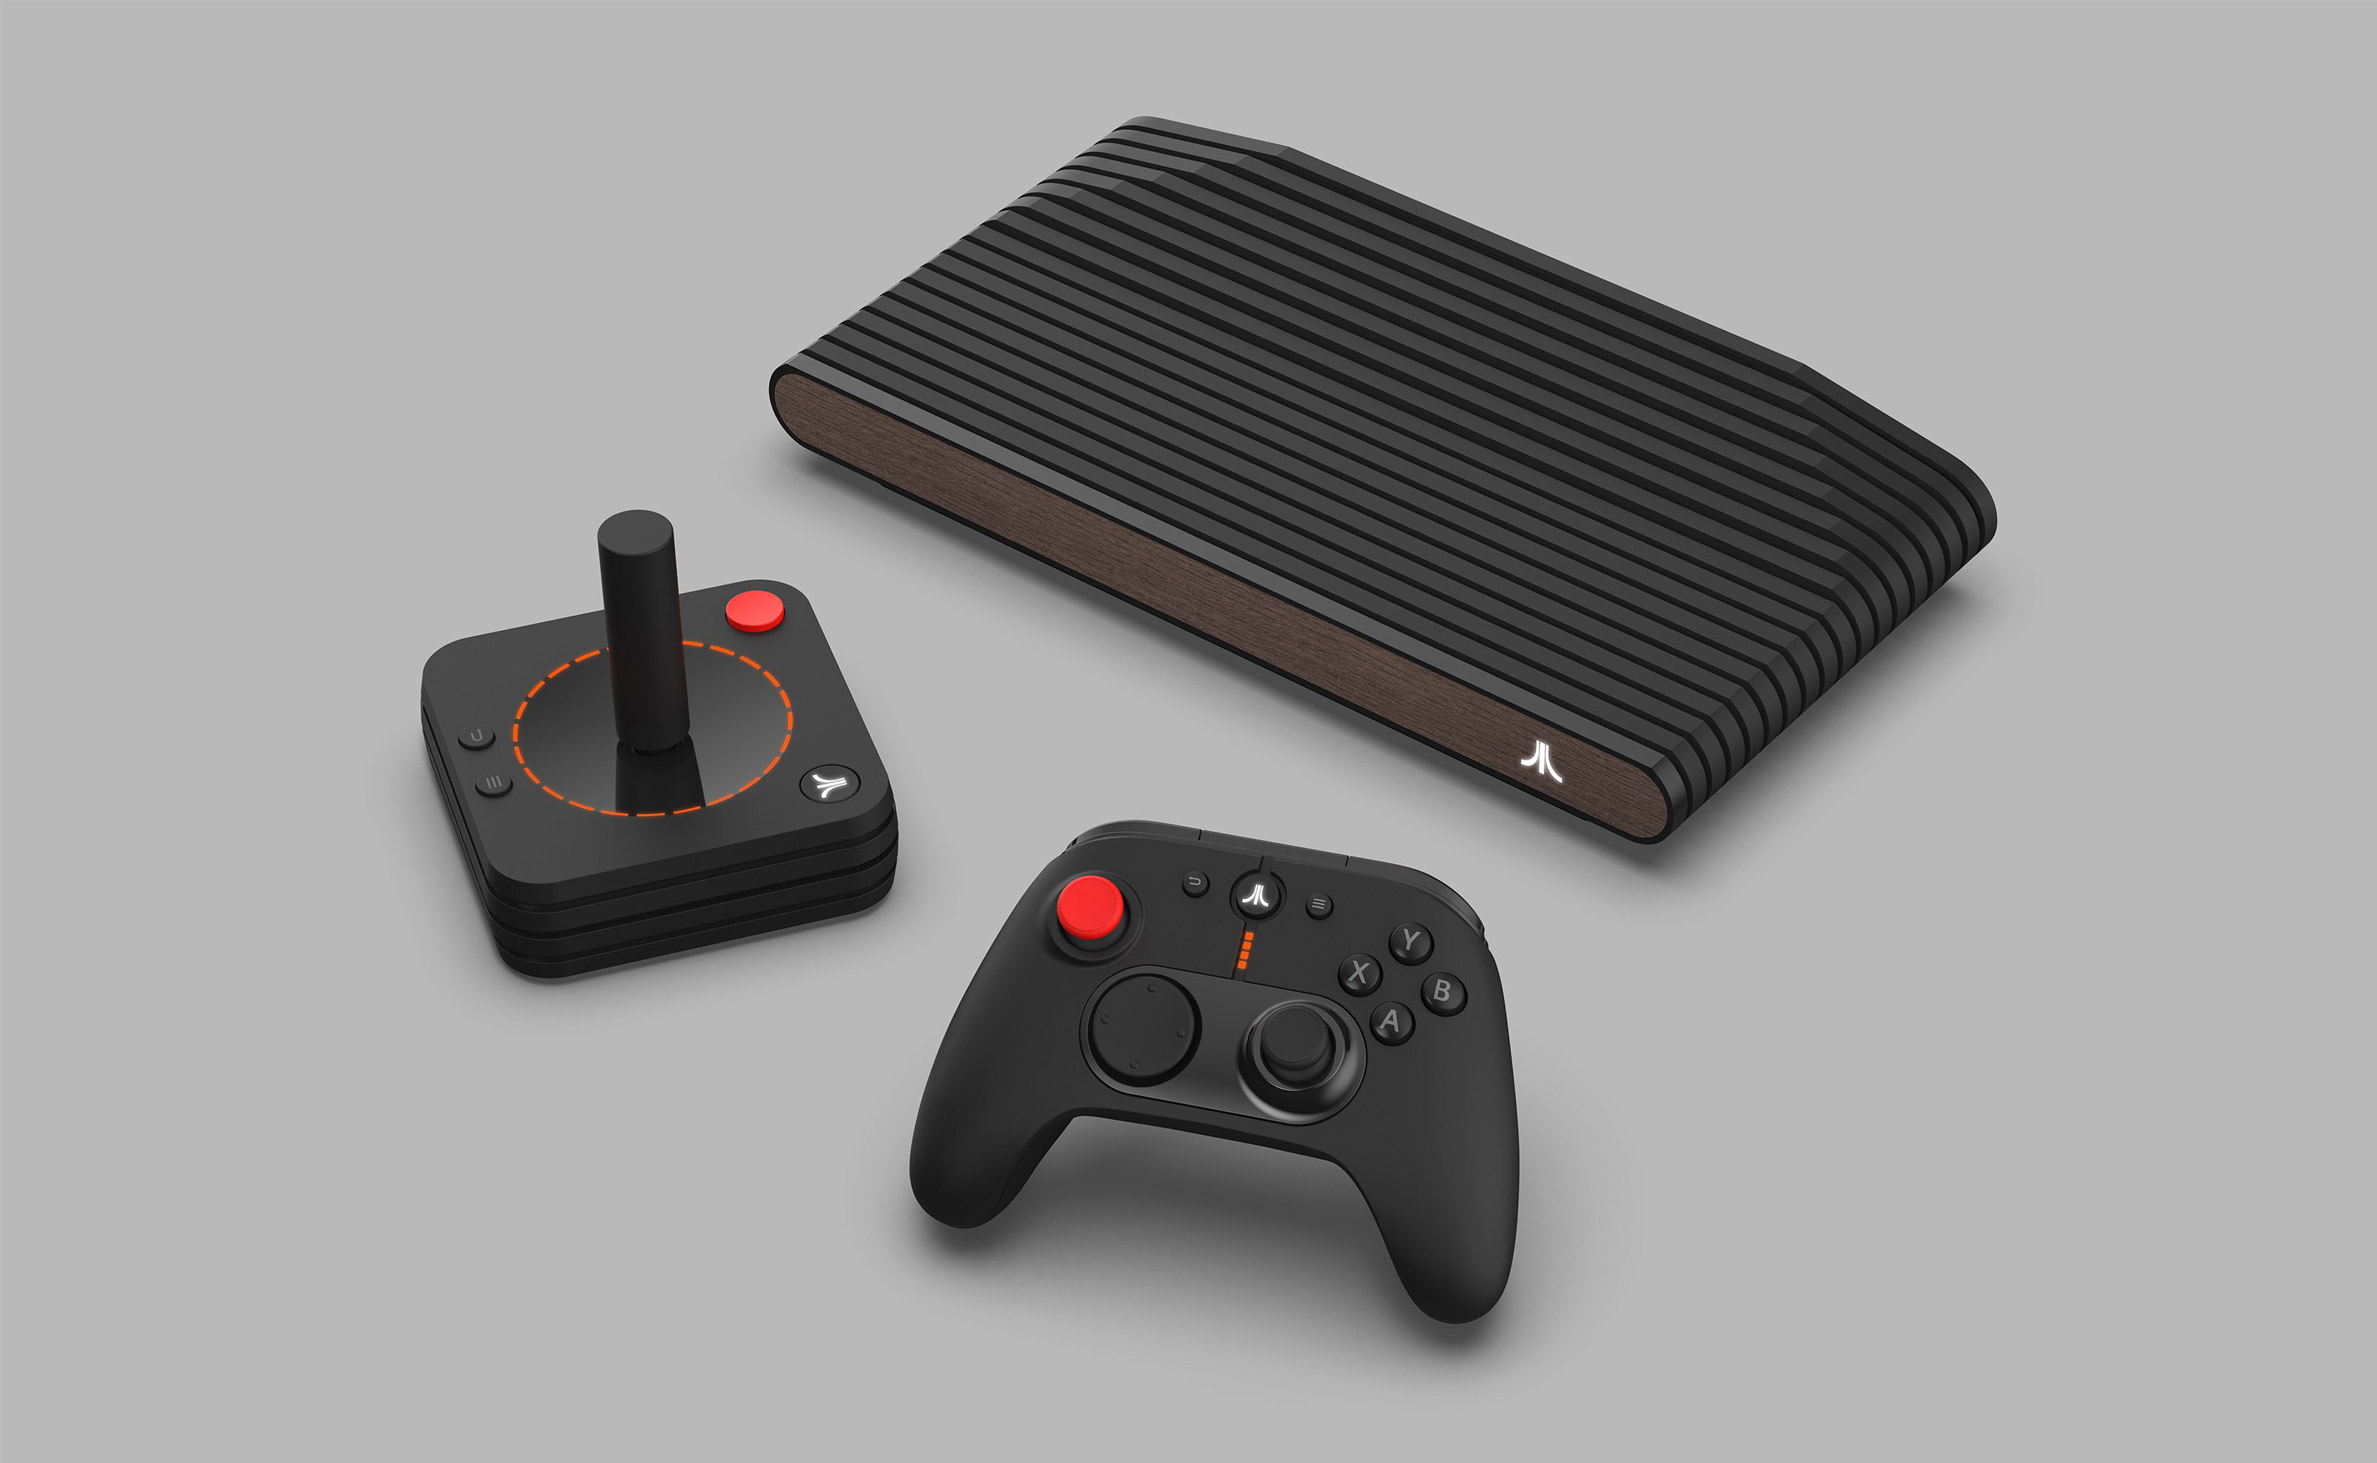 The Atari VCS arrives later this year